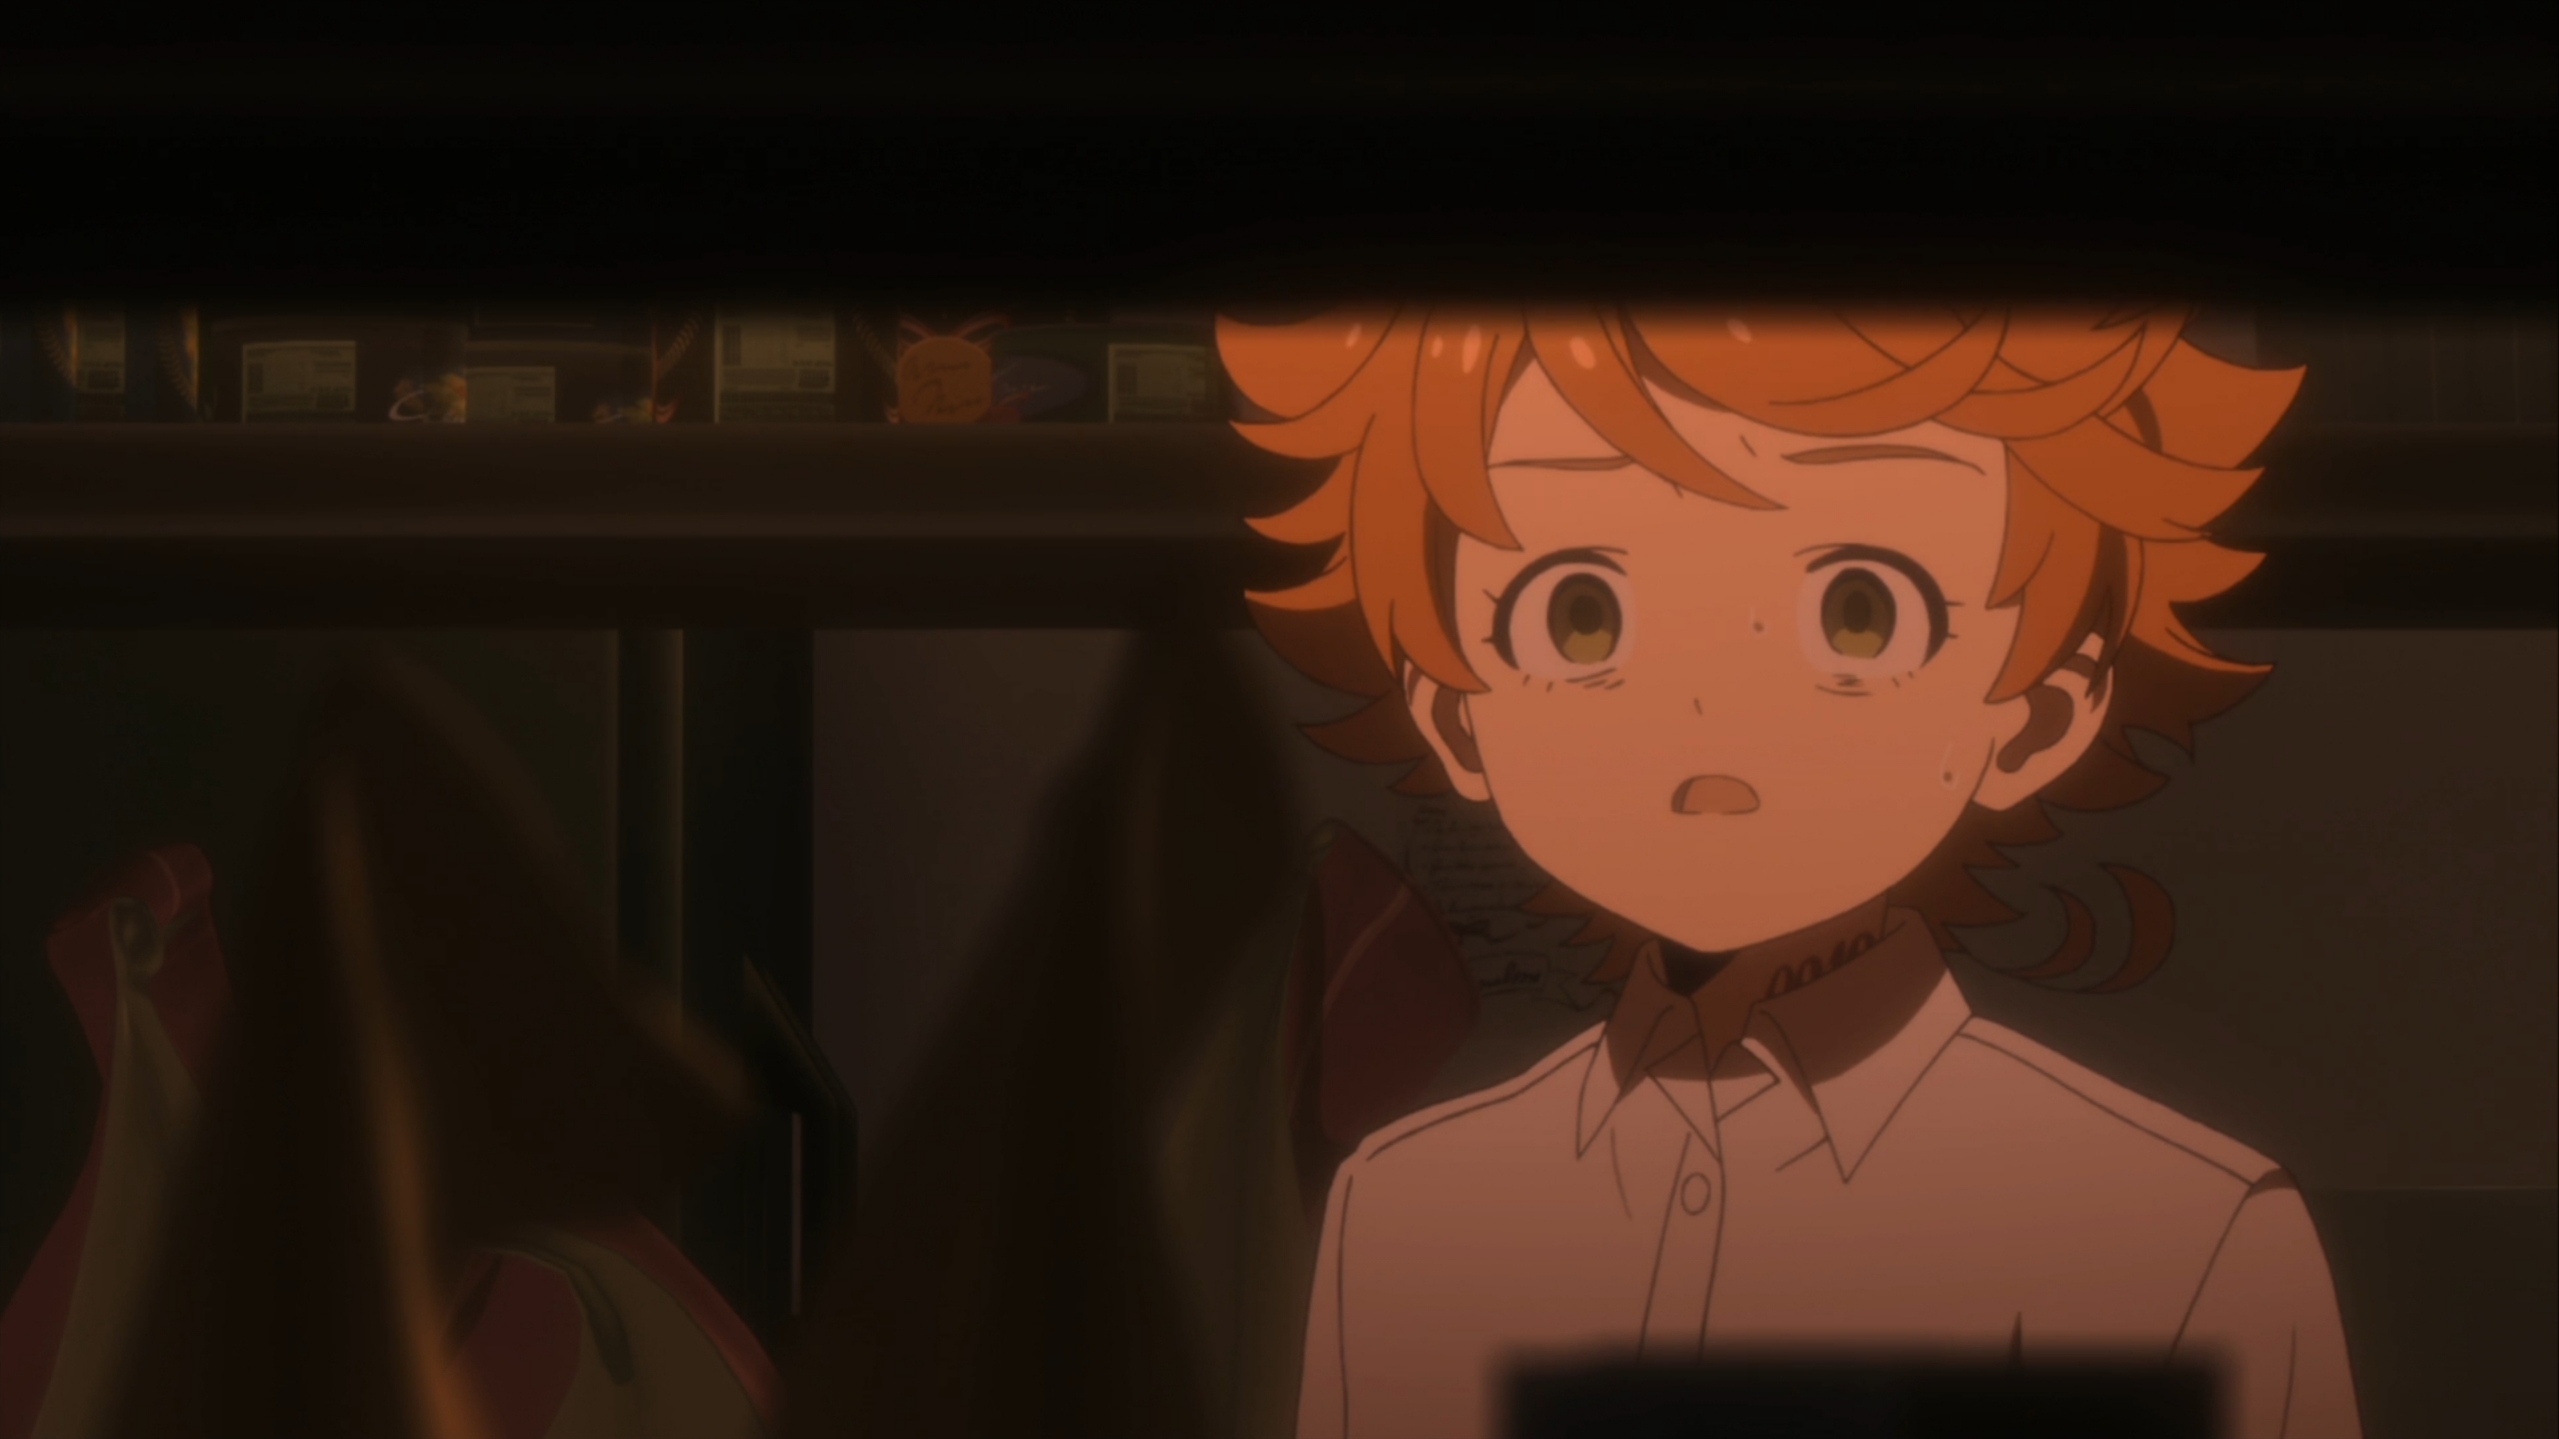 Anime Review: The Promised Neverland Episode 3 by The-Sakura